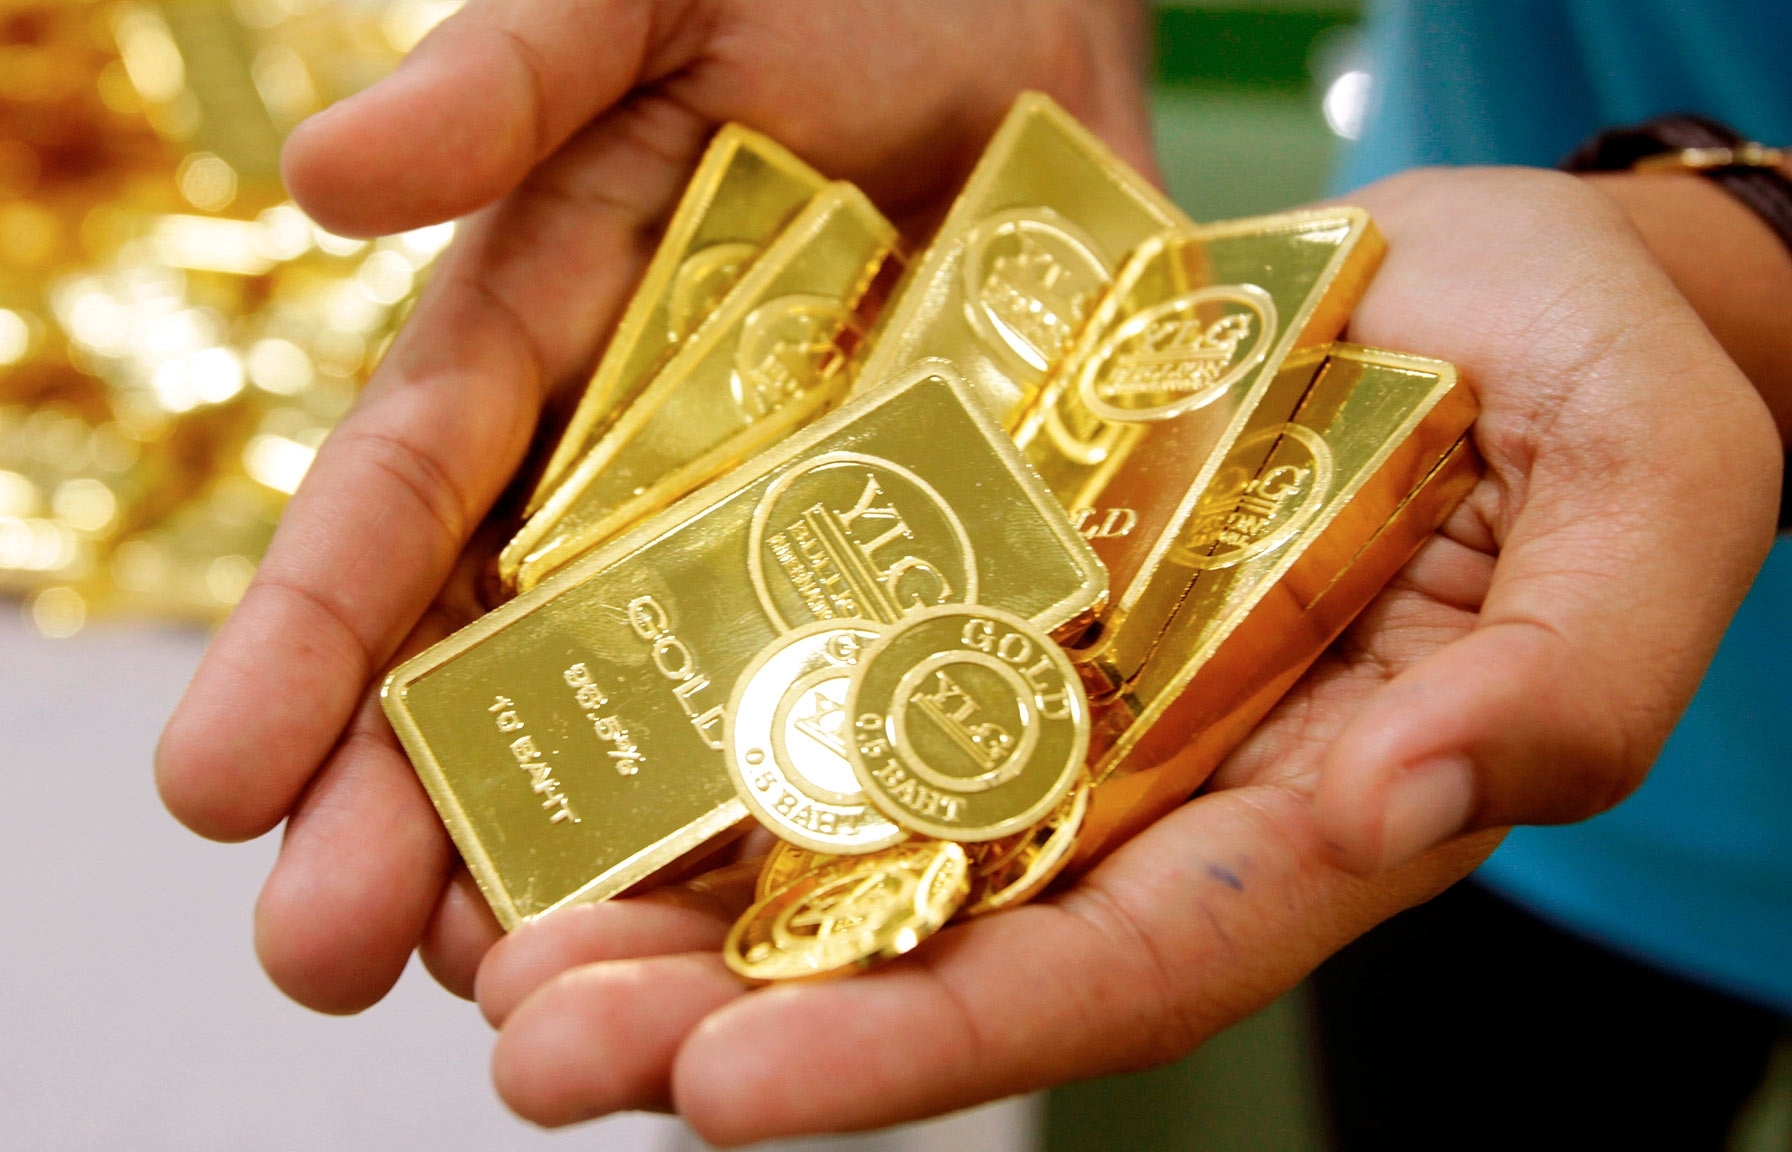 Gold price in Vietnam jumps to two-year high